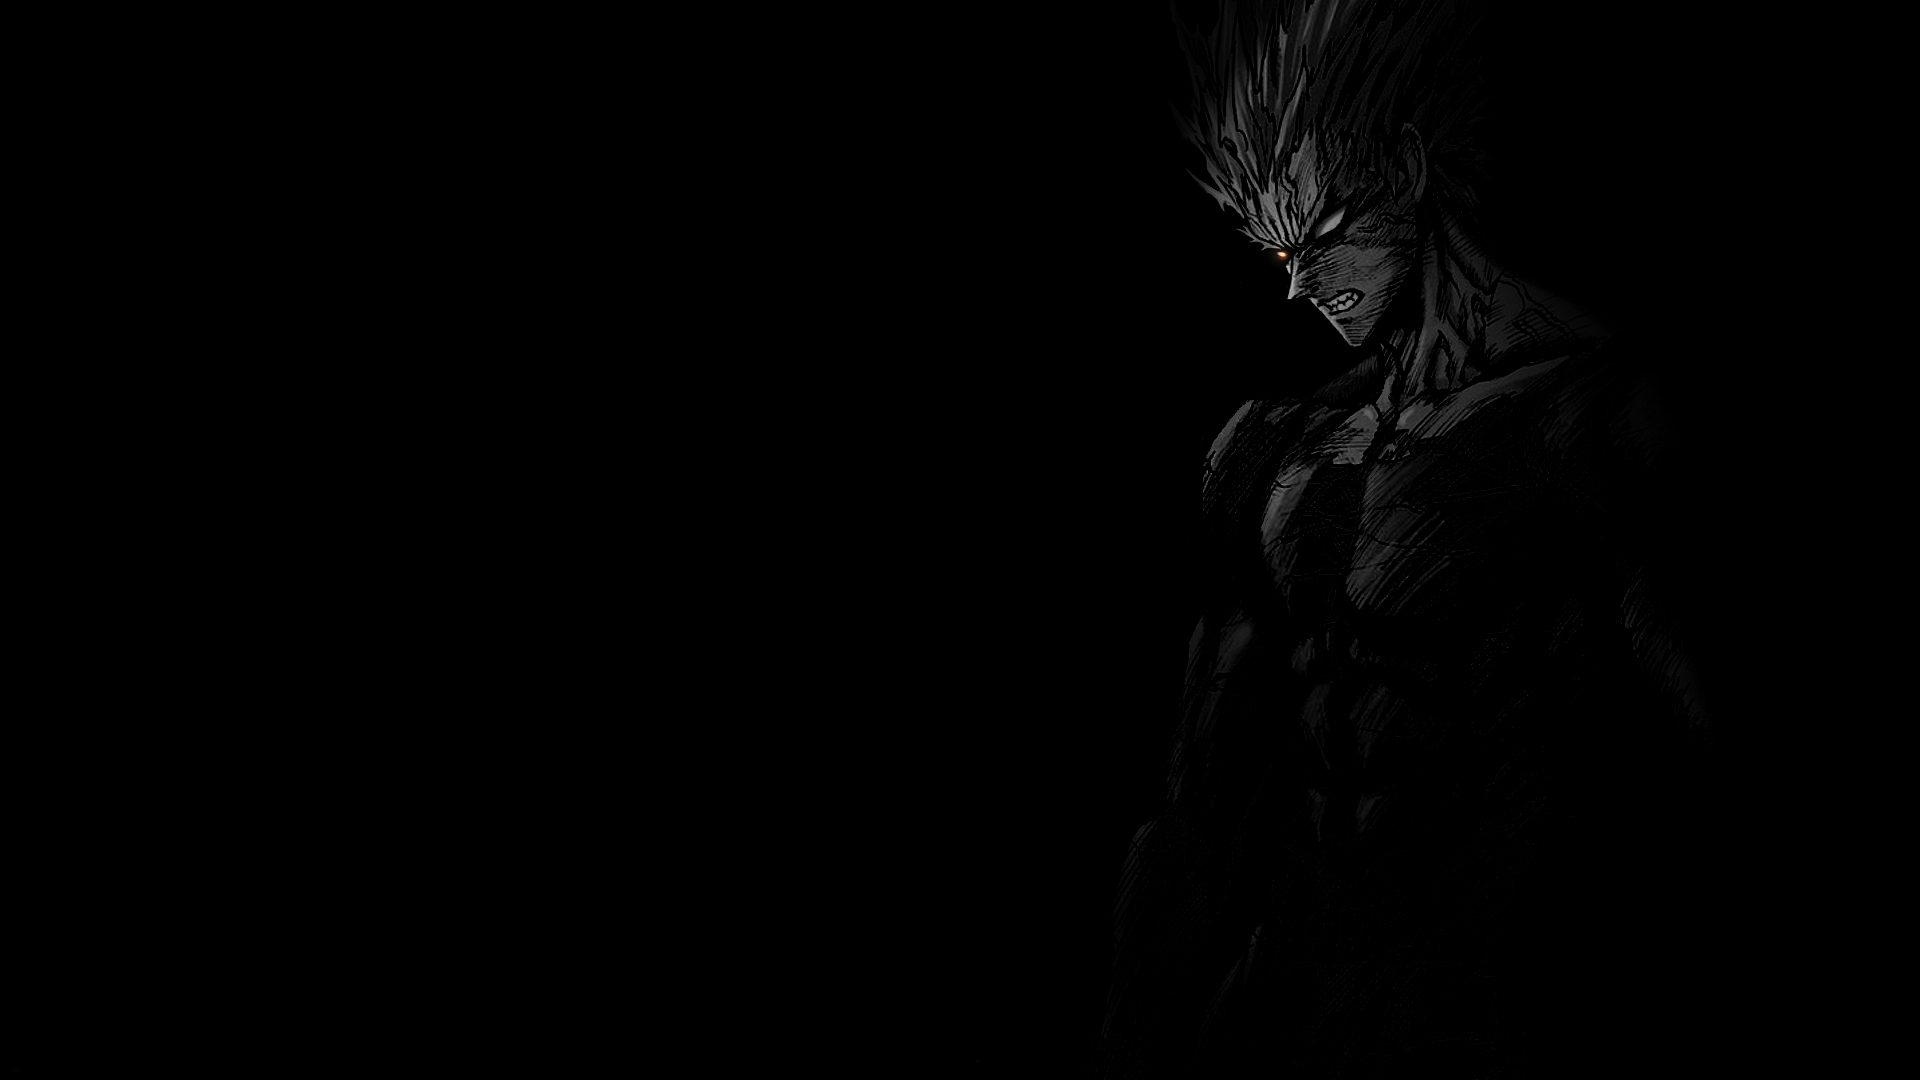 Thought I'd create a quick Garou Wallpaper for Garou fanboys out there. 1920 x 1080 300dpi